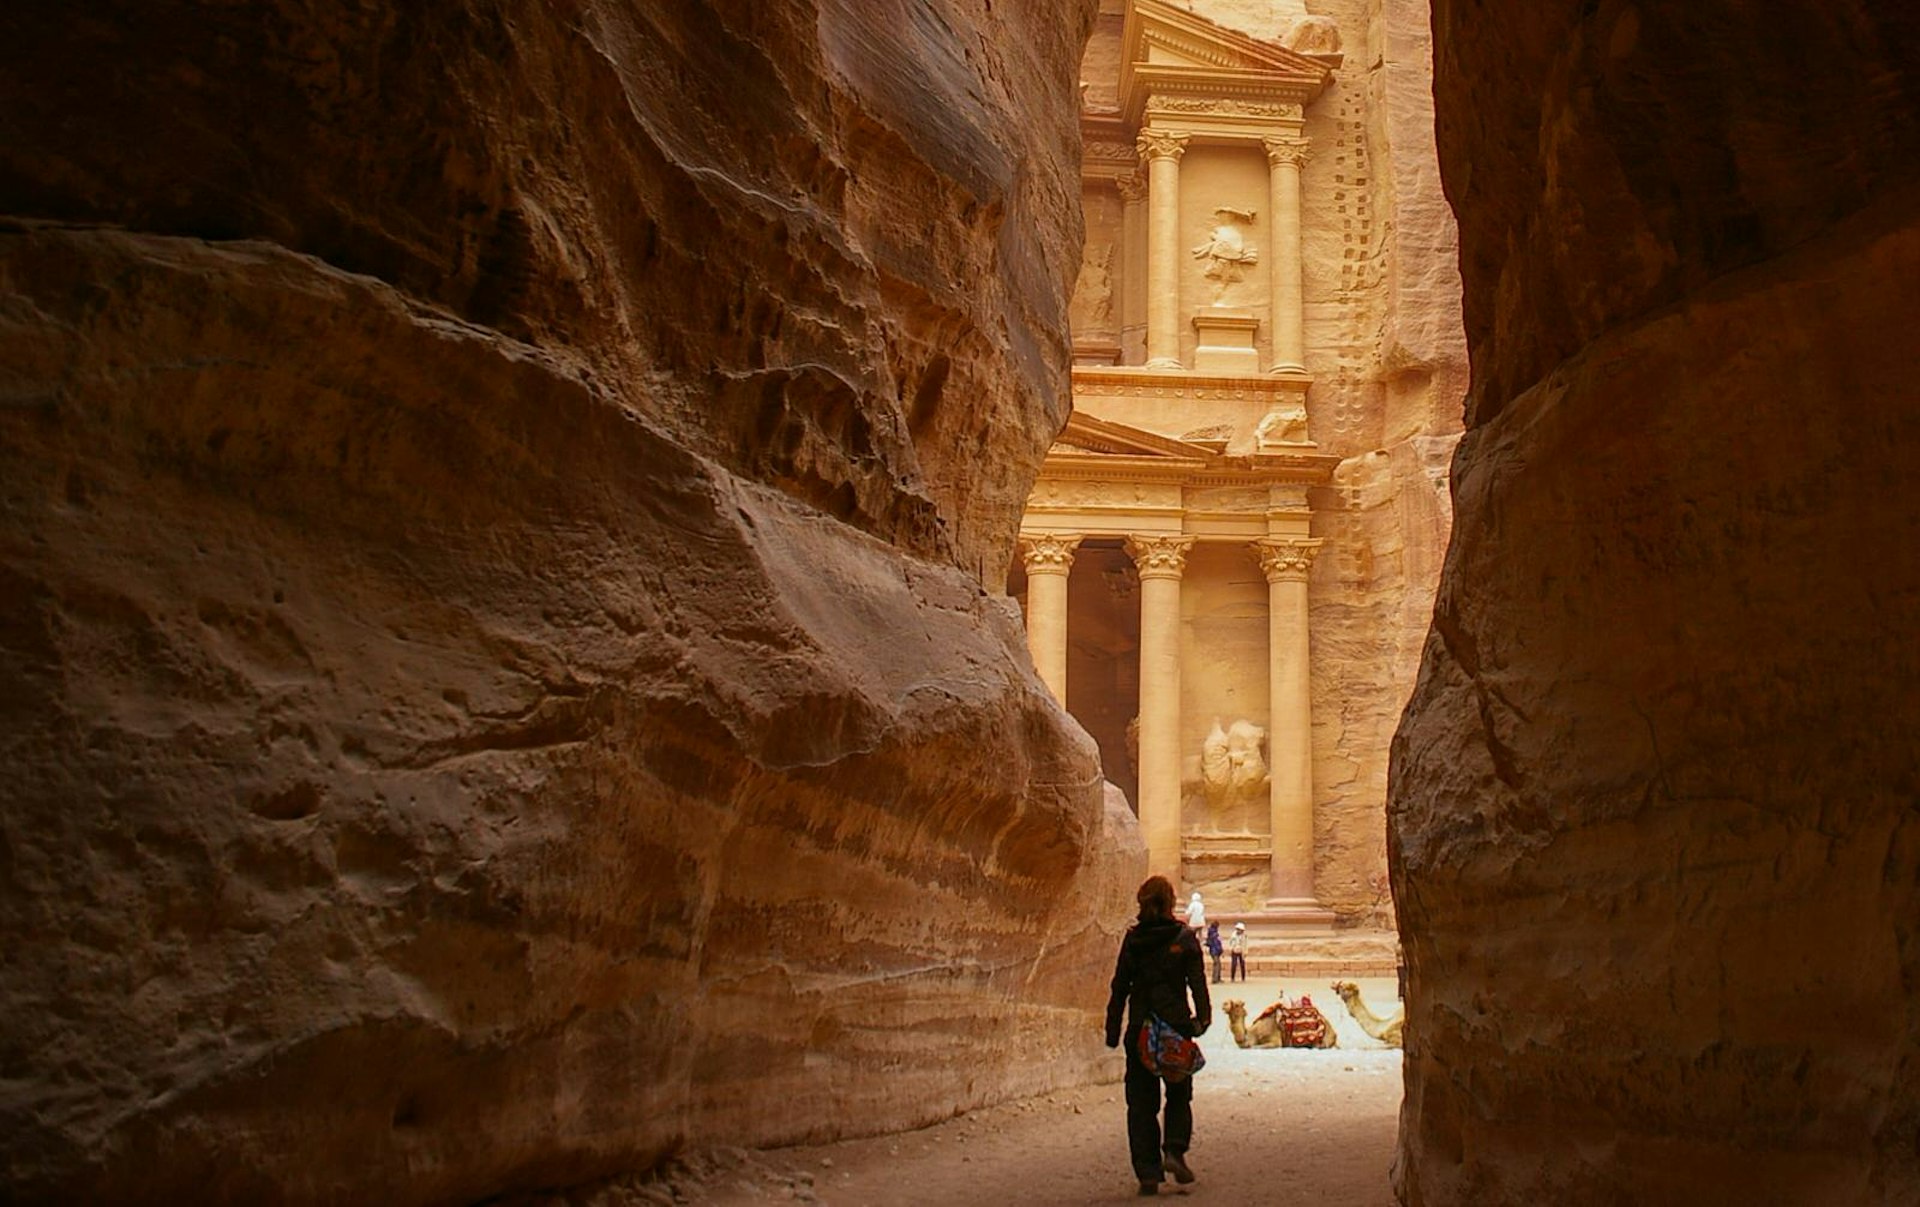 A view of The Treasury temple at Petra, Jordan, framed by a rocky passageway